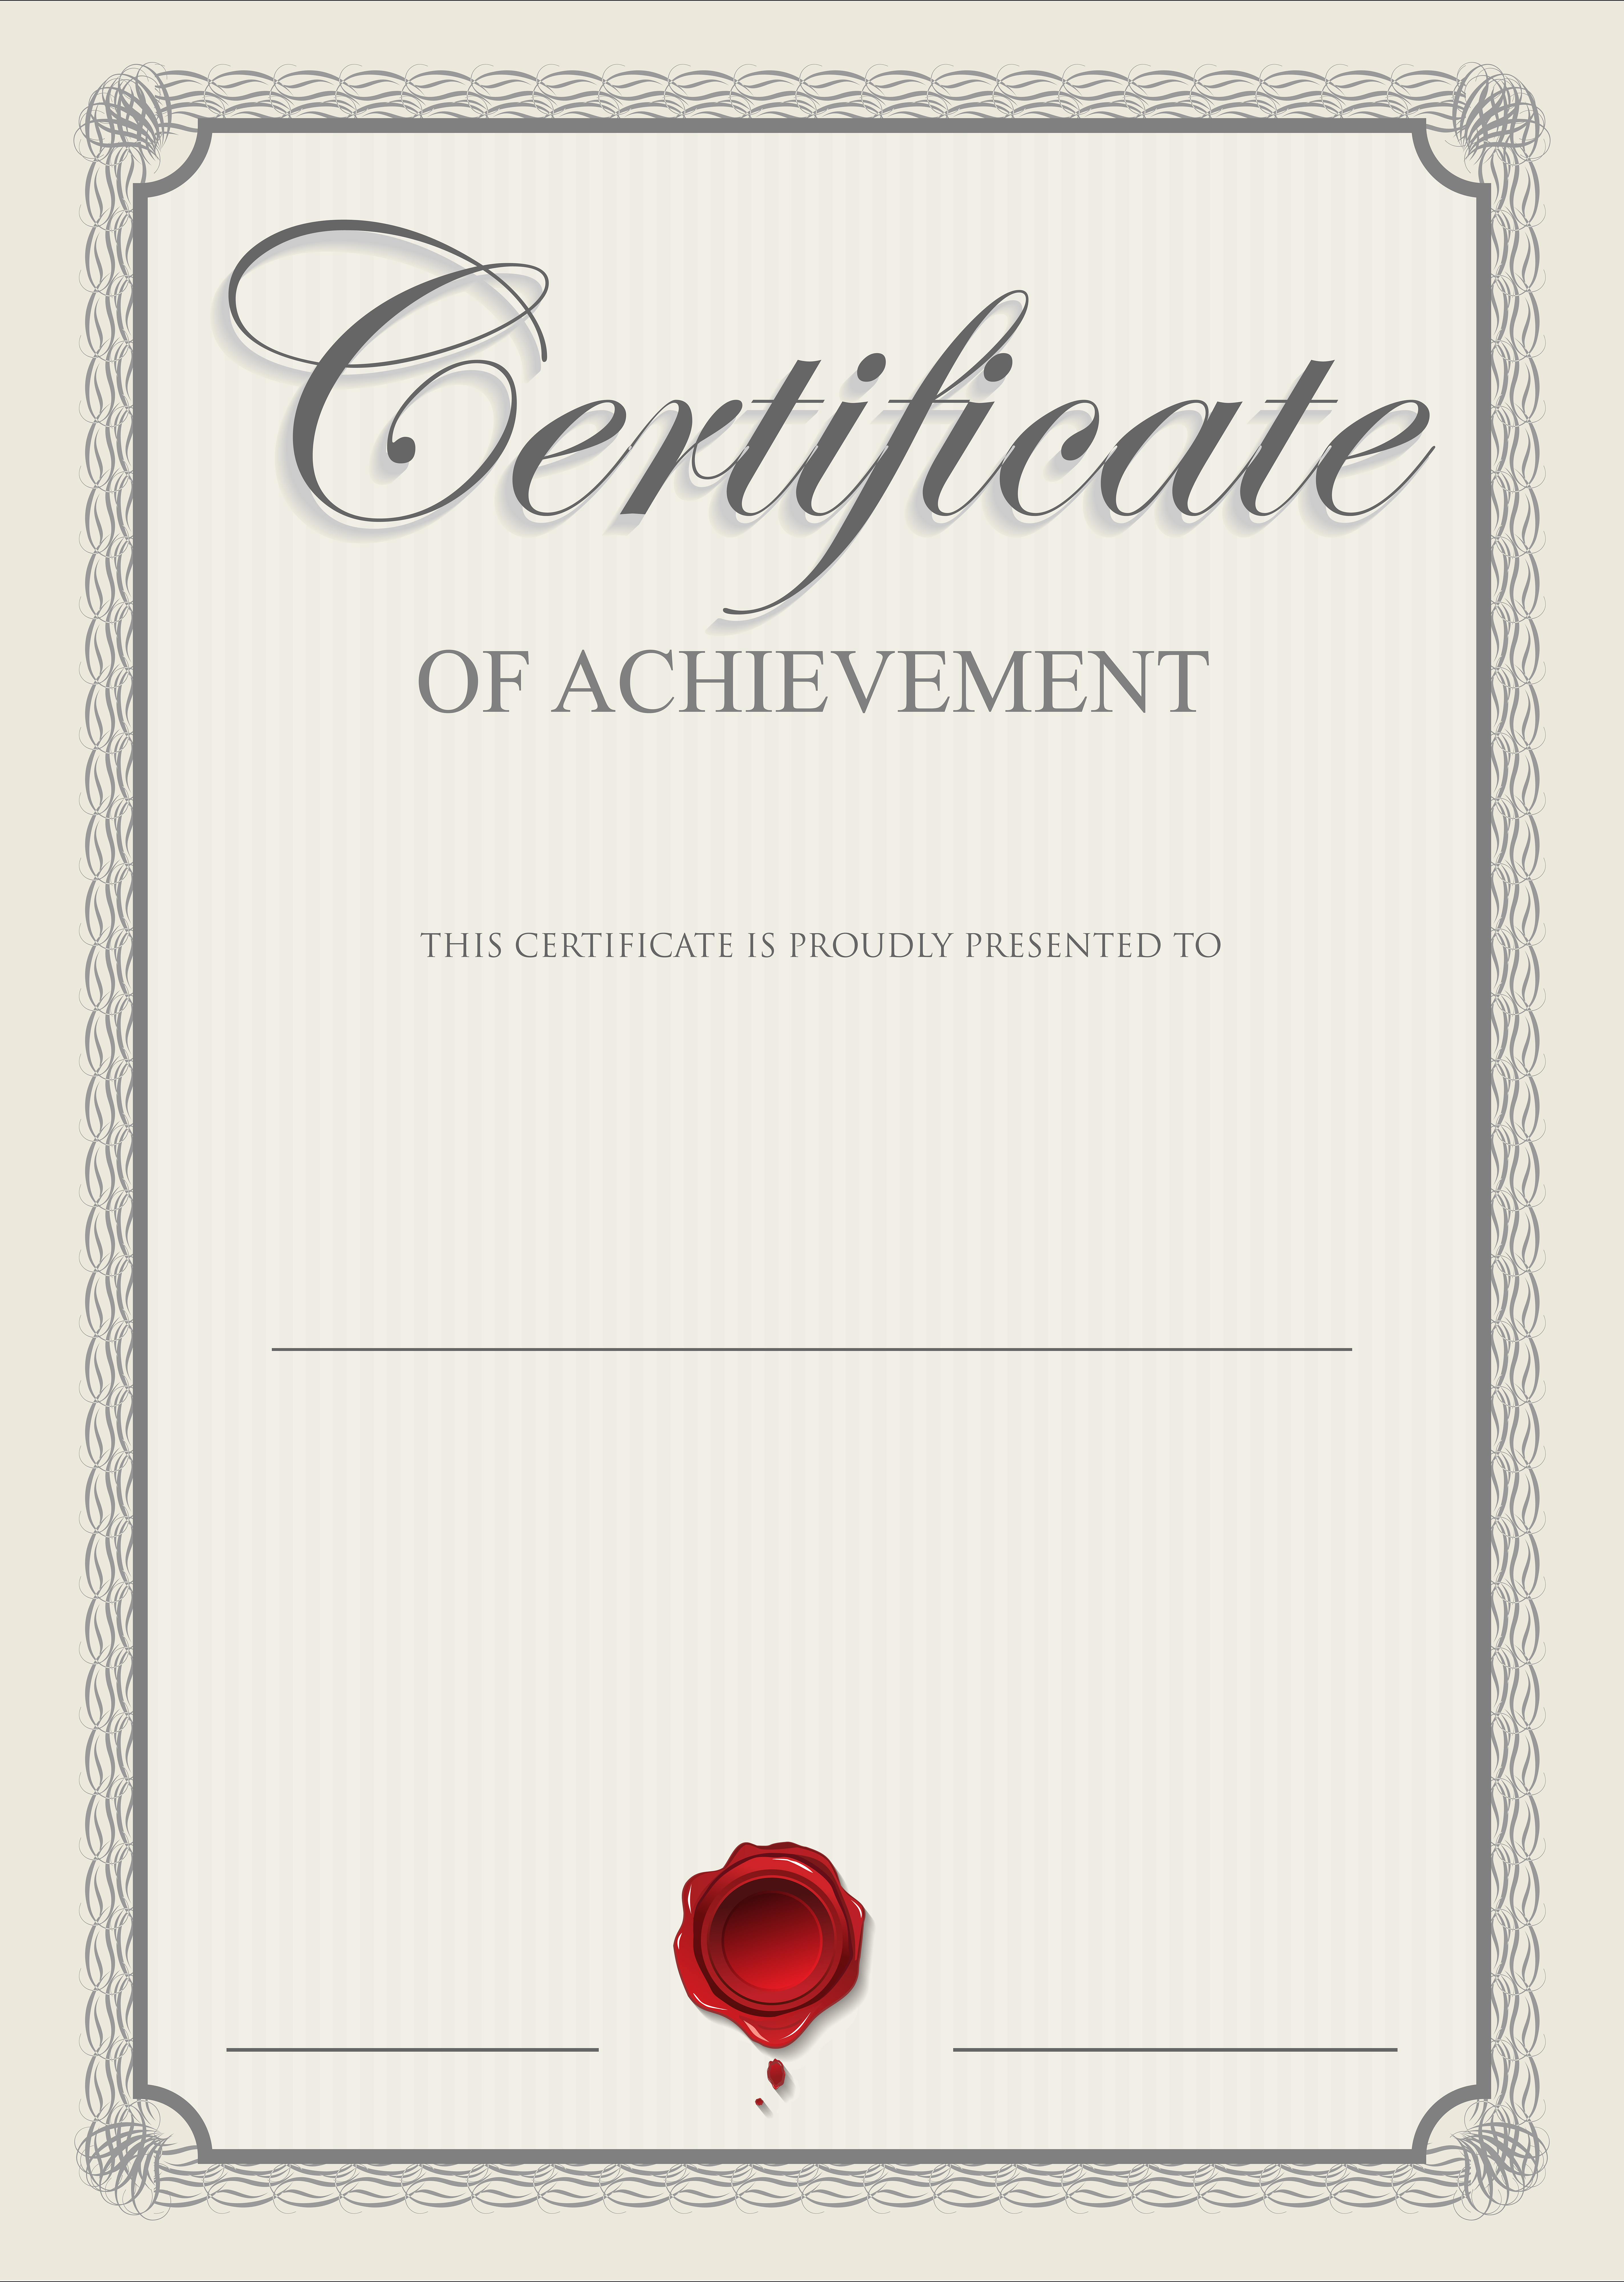 Certificate PNG Free Image